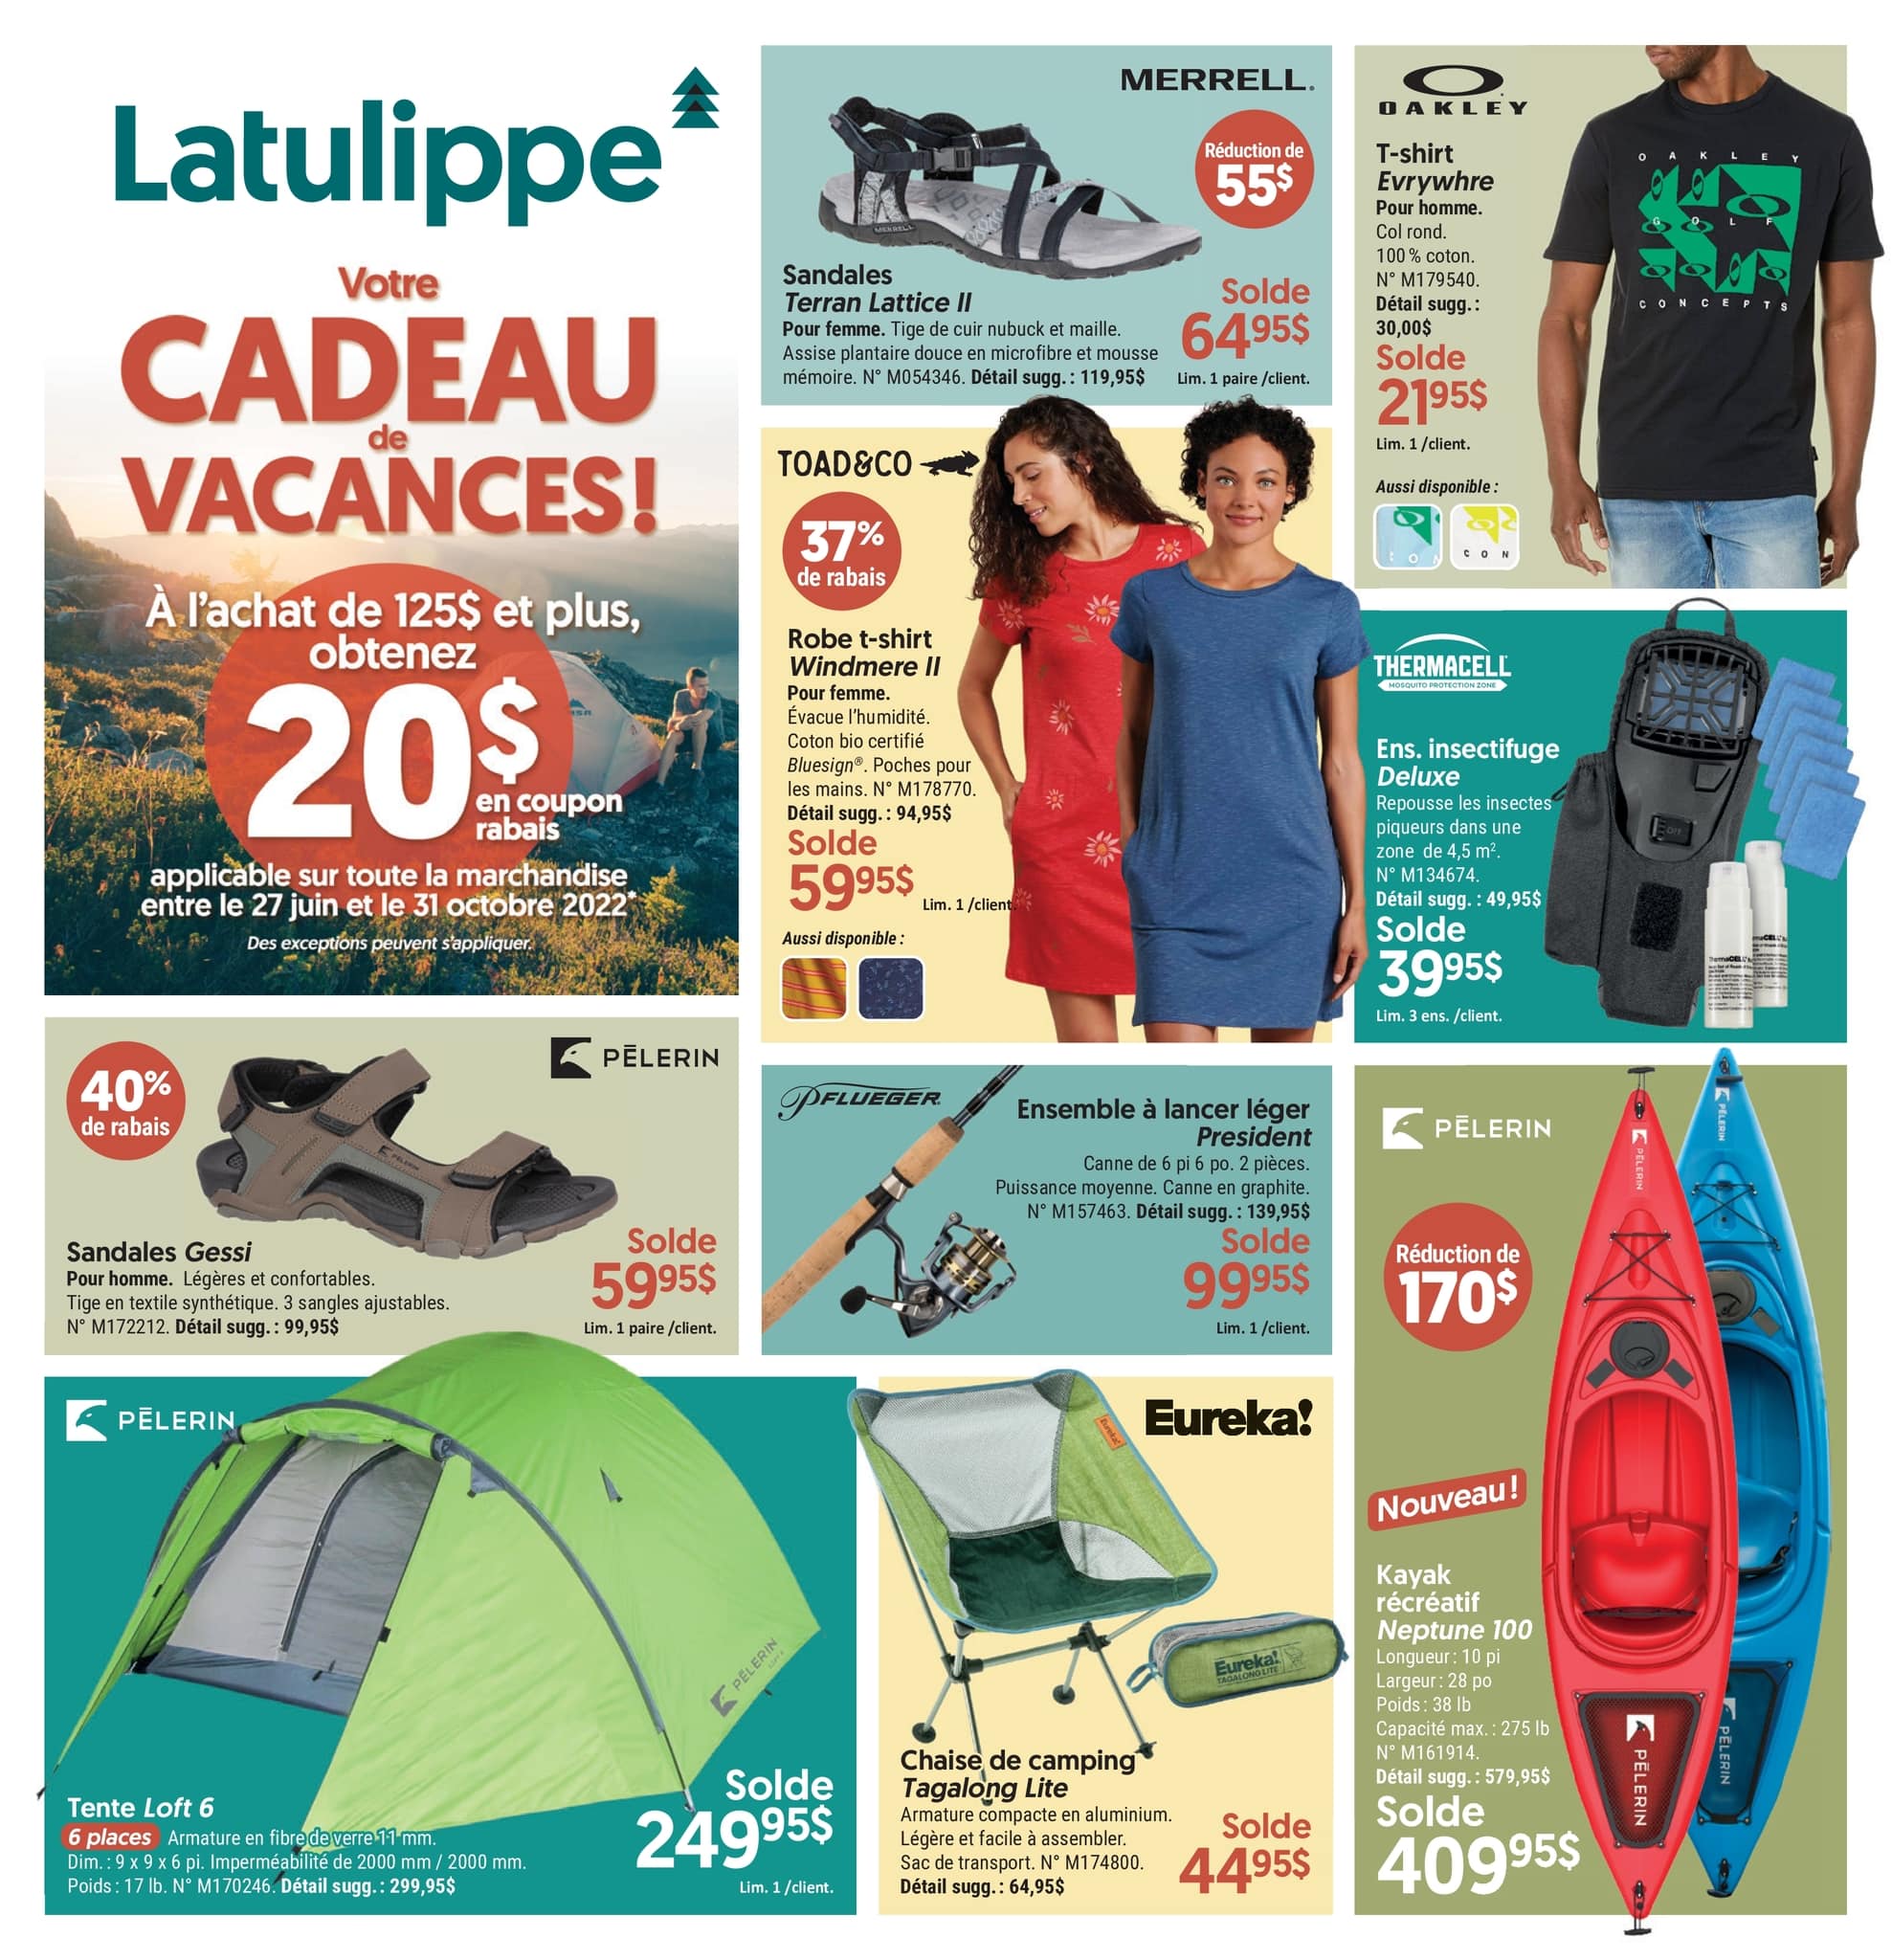 Circulaire Magasin Latulippe - Page 1